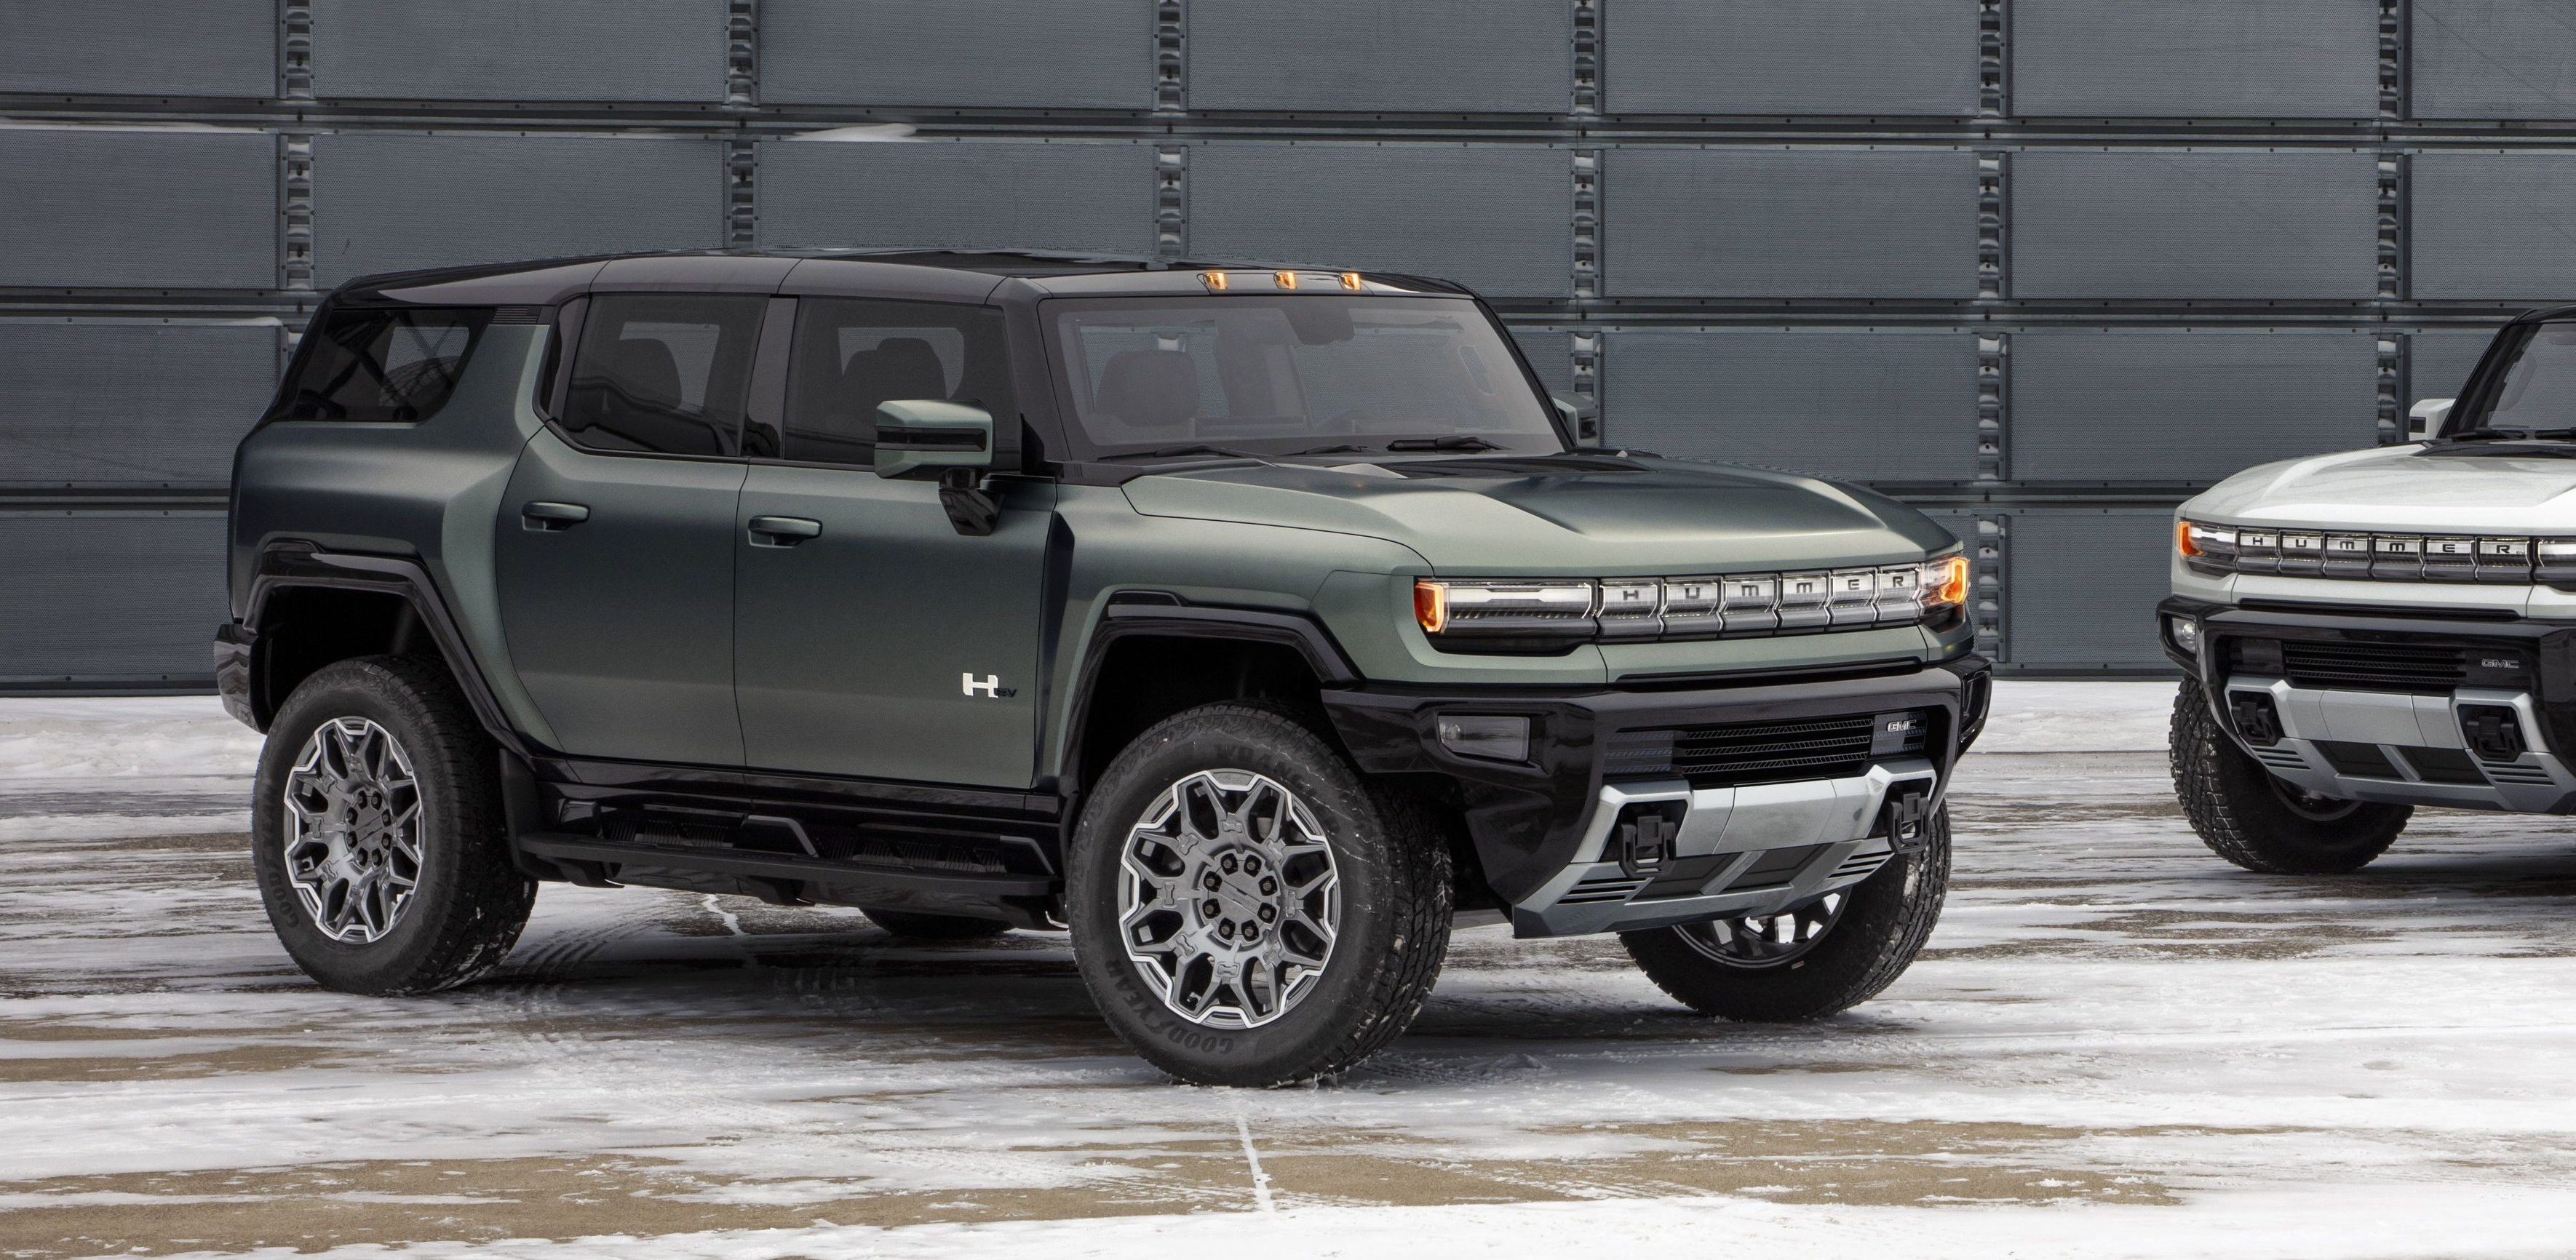 GM unveils Hummer EV SUV version starting at $80,000, but it is going